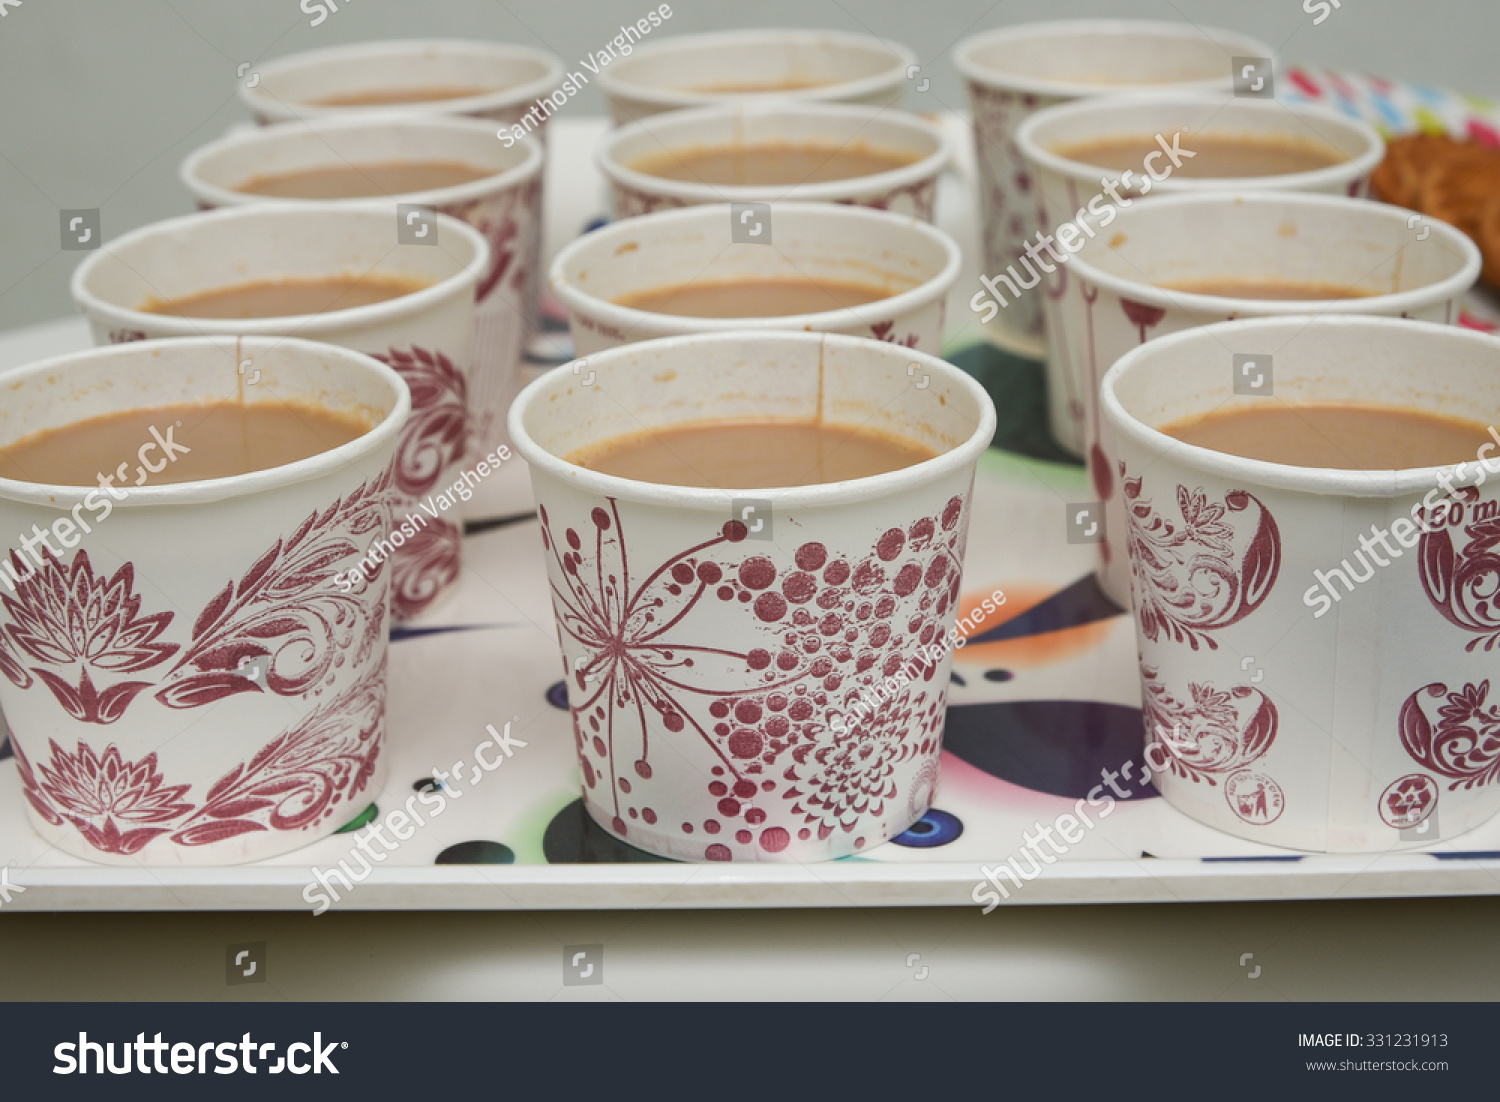 stock-photo-many-rows-of-paper-cups-with-tea-milk-indian-masala-chai-tea-refreshing-indian-blend-of-black-tea-331231913.jpg